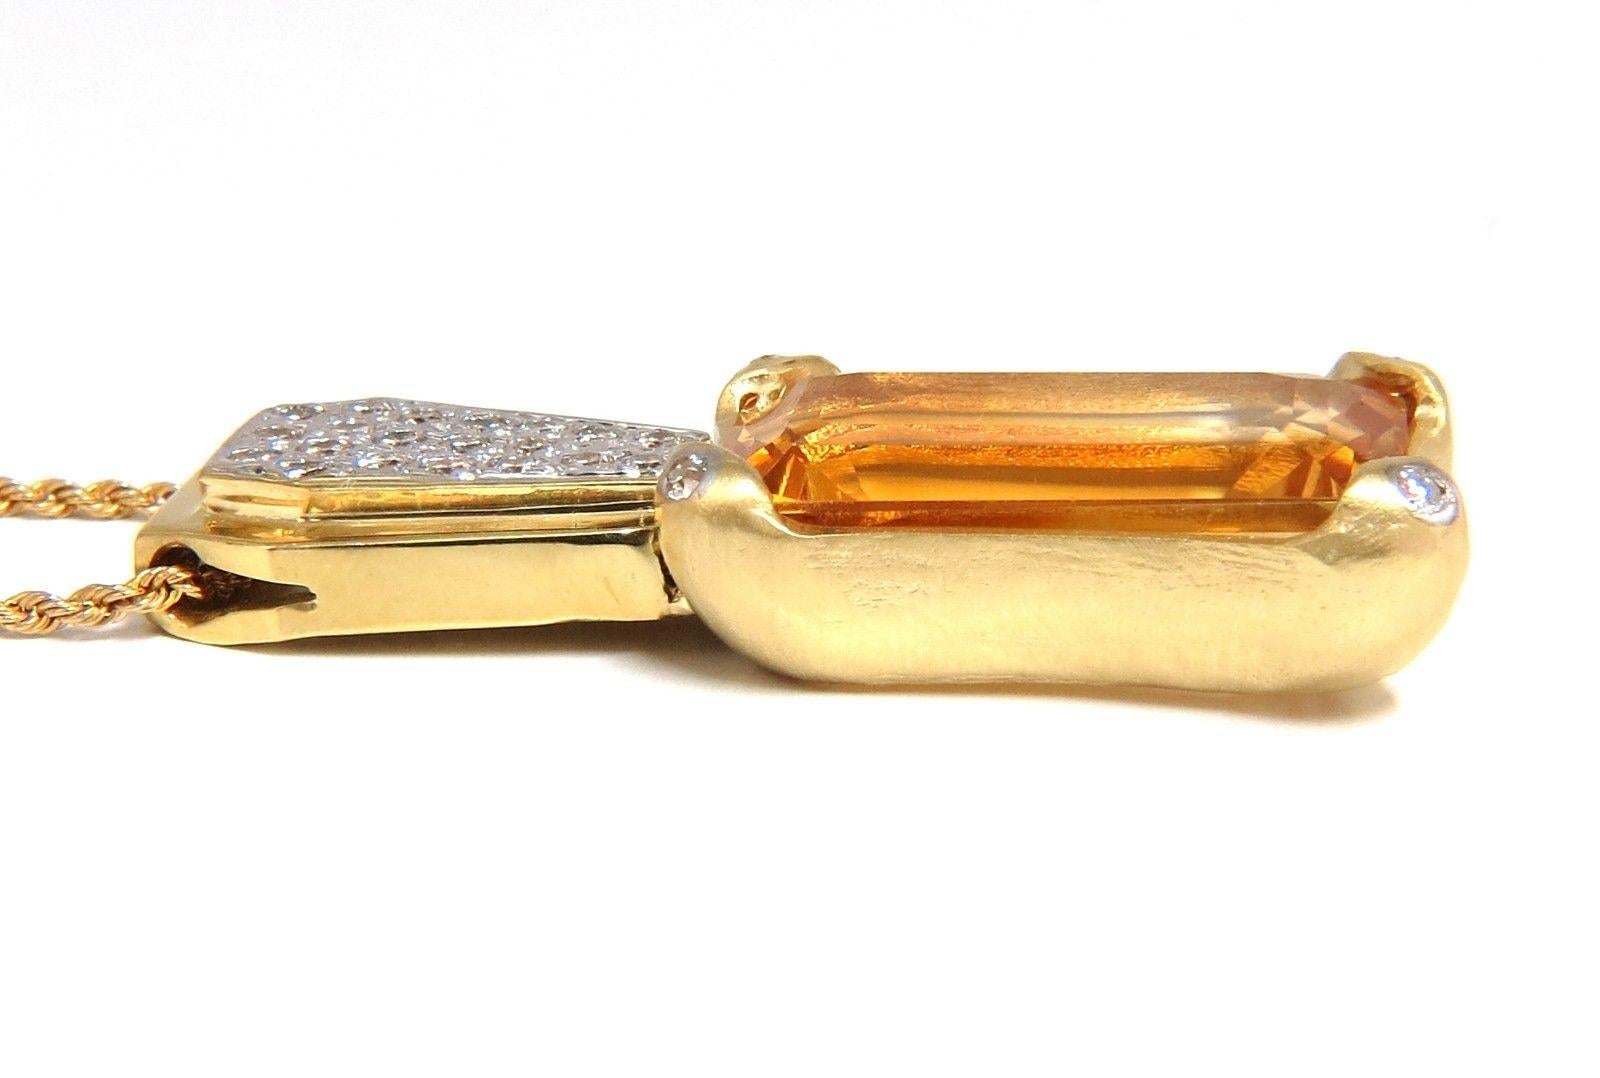 Handmade Citrine Necklace.

20ct. Natural Honey color citrine
Brilliant Emereld

Emerald cut.

Clean Clarity

25  x 14.5mm


Side natural diamonds:
.50ct. 

Rounds, full cuts.

G-color, Vs-2 clarity

14kt. yellow gold

Excellent sparkle 

24 grams.